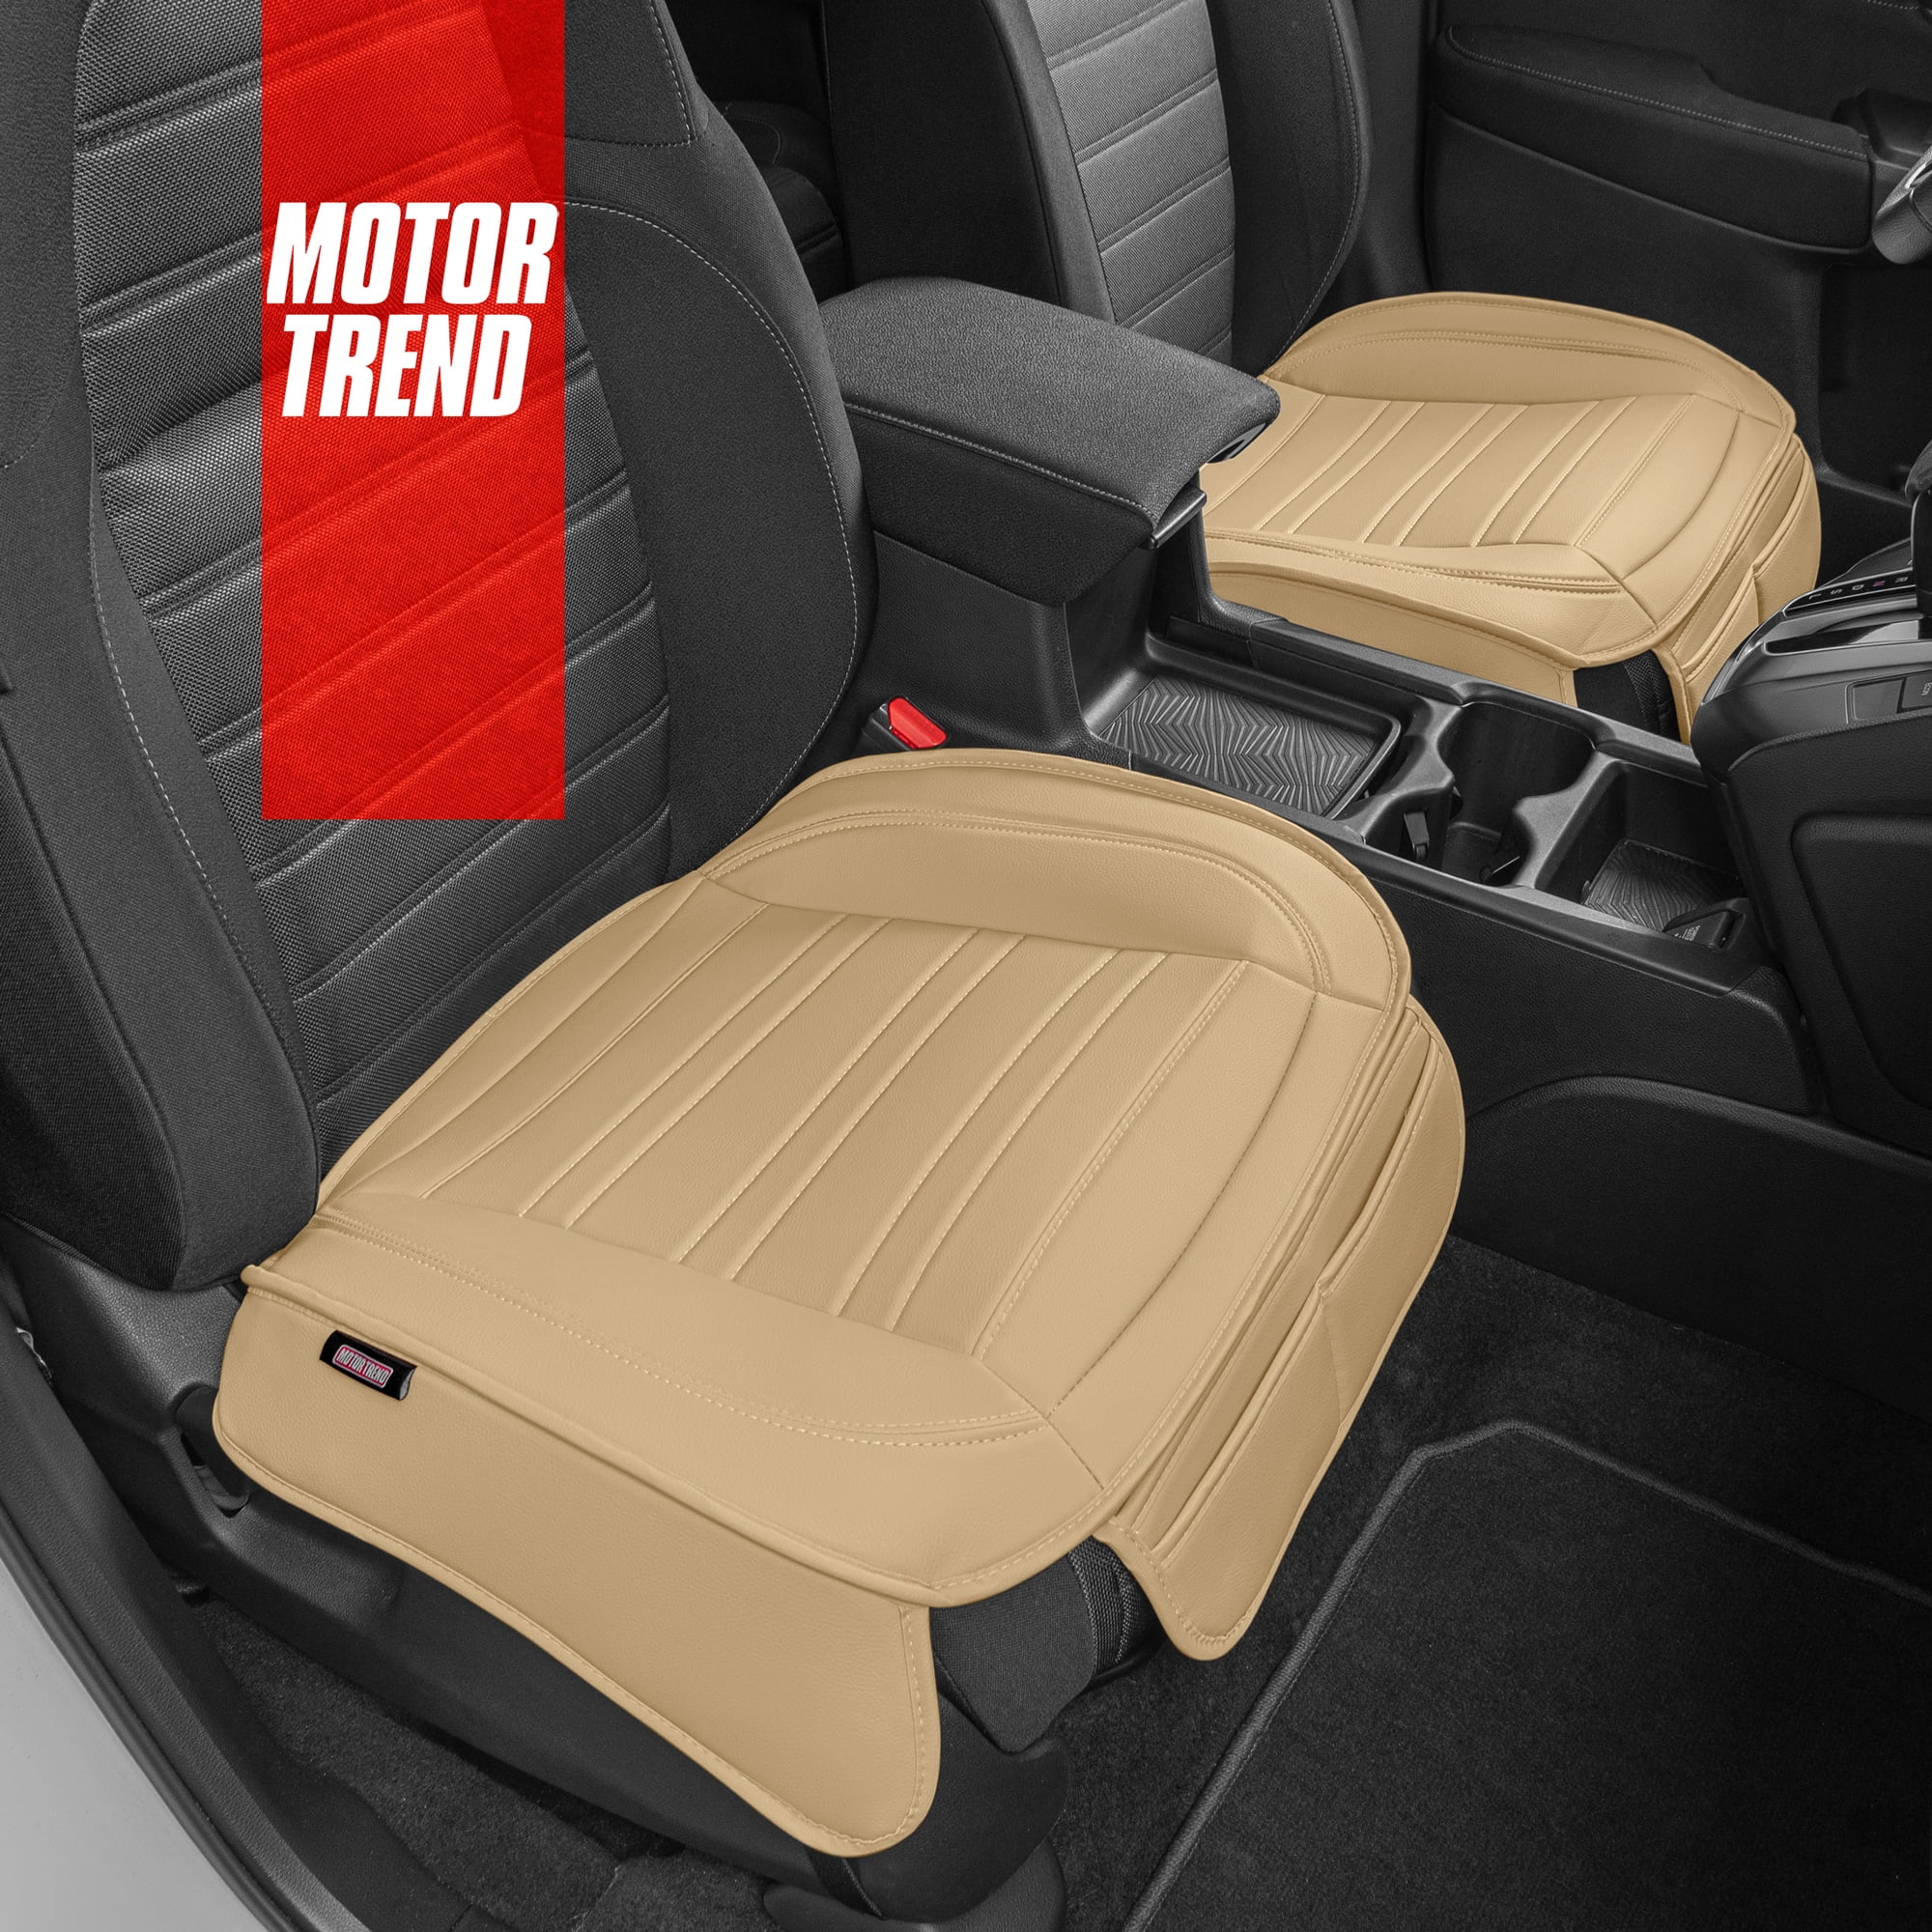 Motor Trend Car Seat Covers for Auto Truck SUV, Beige Faux Leather Front  Seat Covers for Cars